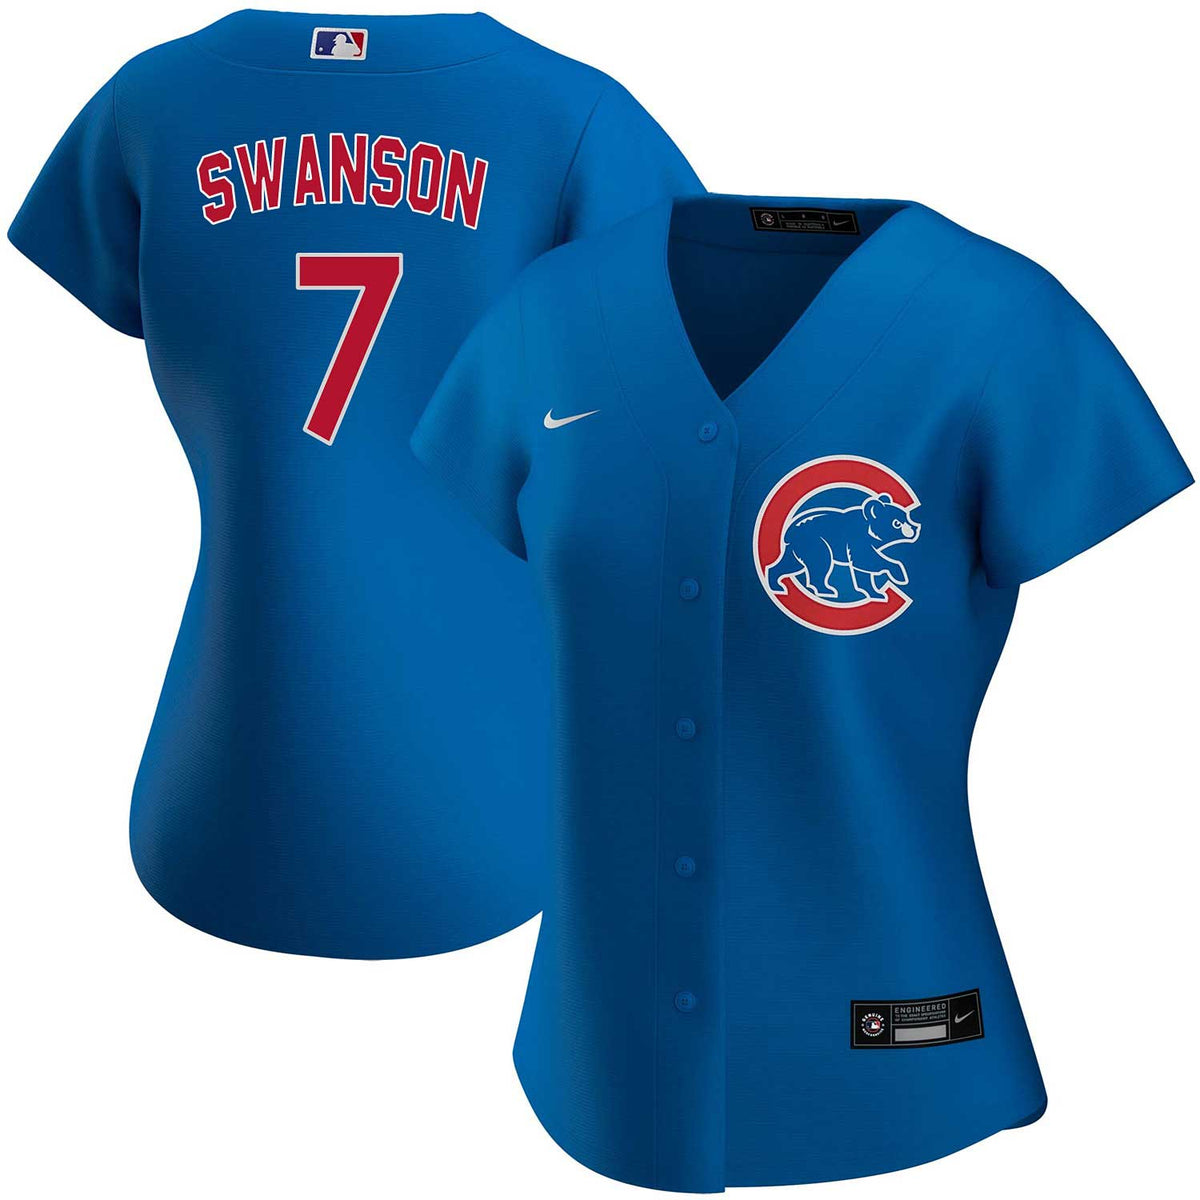 Women's Nike Dansby Swanson White/Royal Chicago Cubs Home Replica Player  Jersey